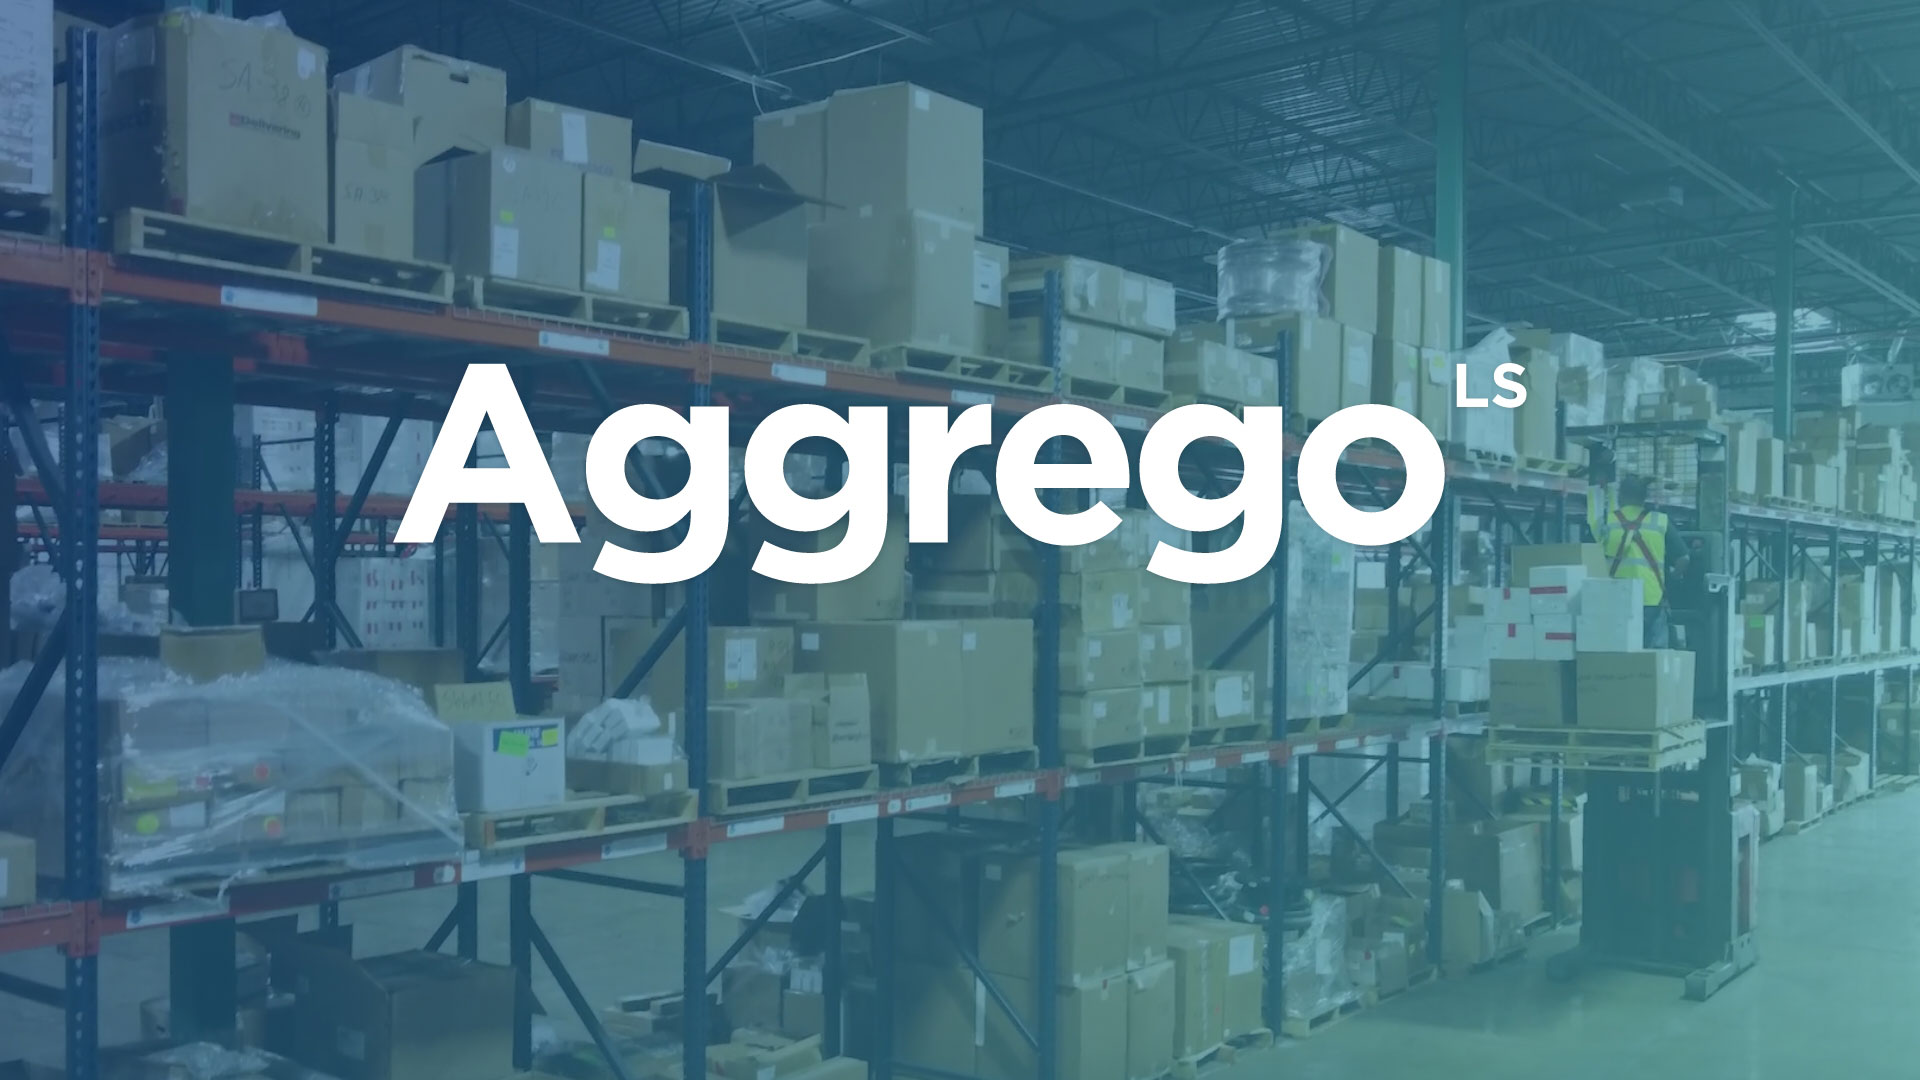 Aggrego Logistic Software warehouses